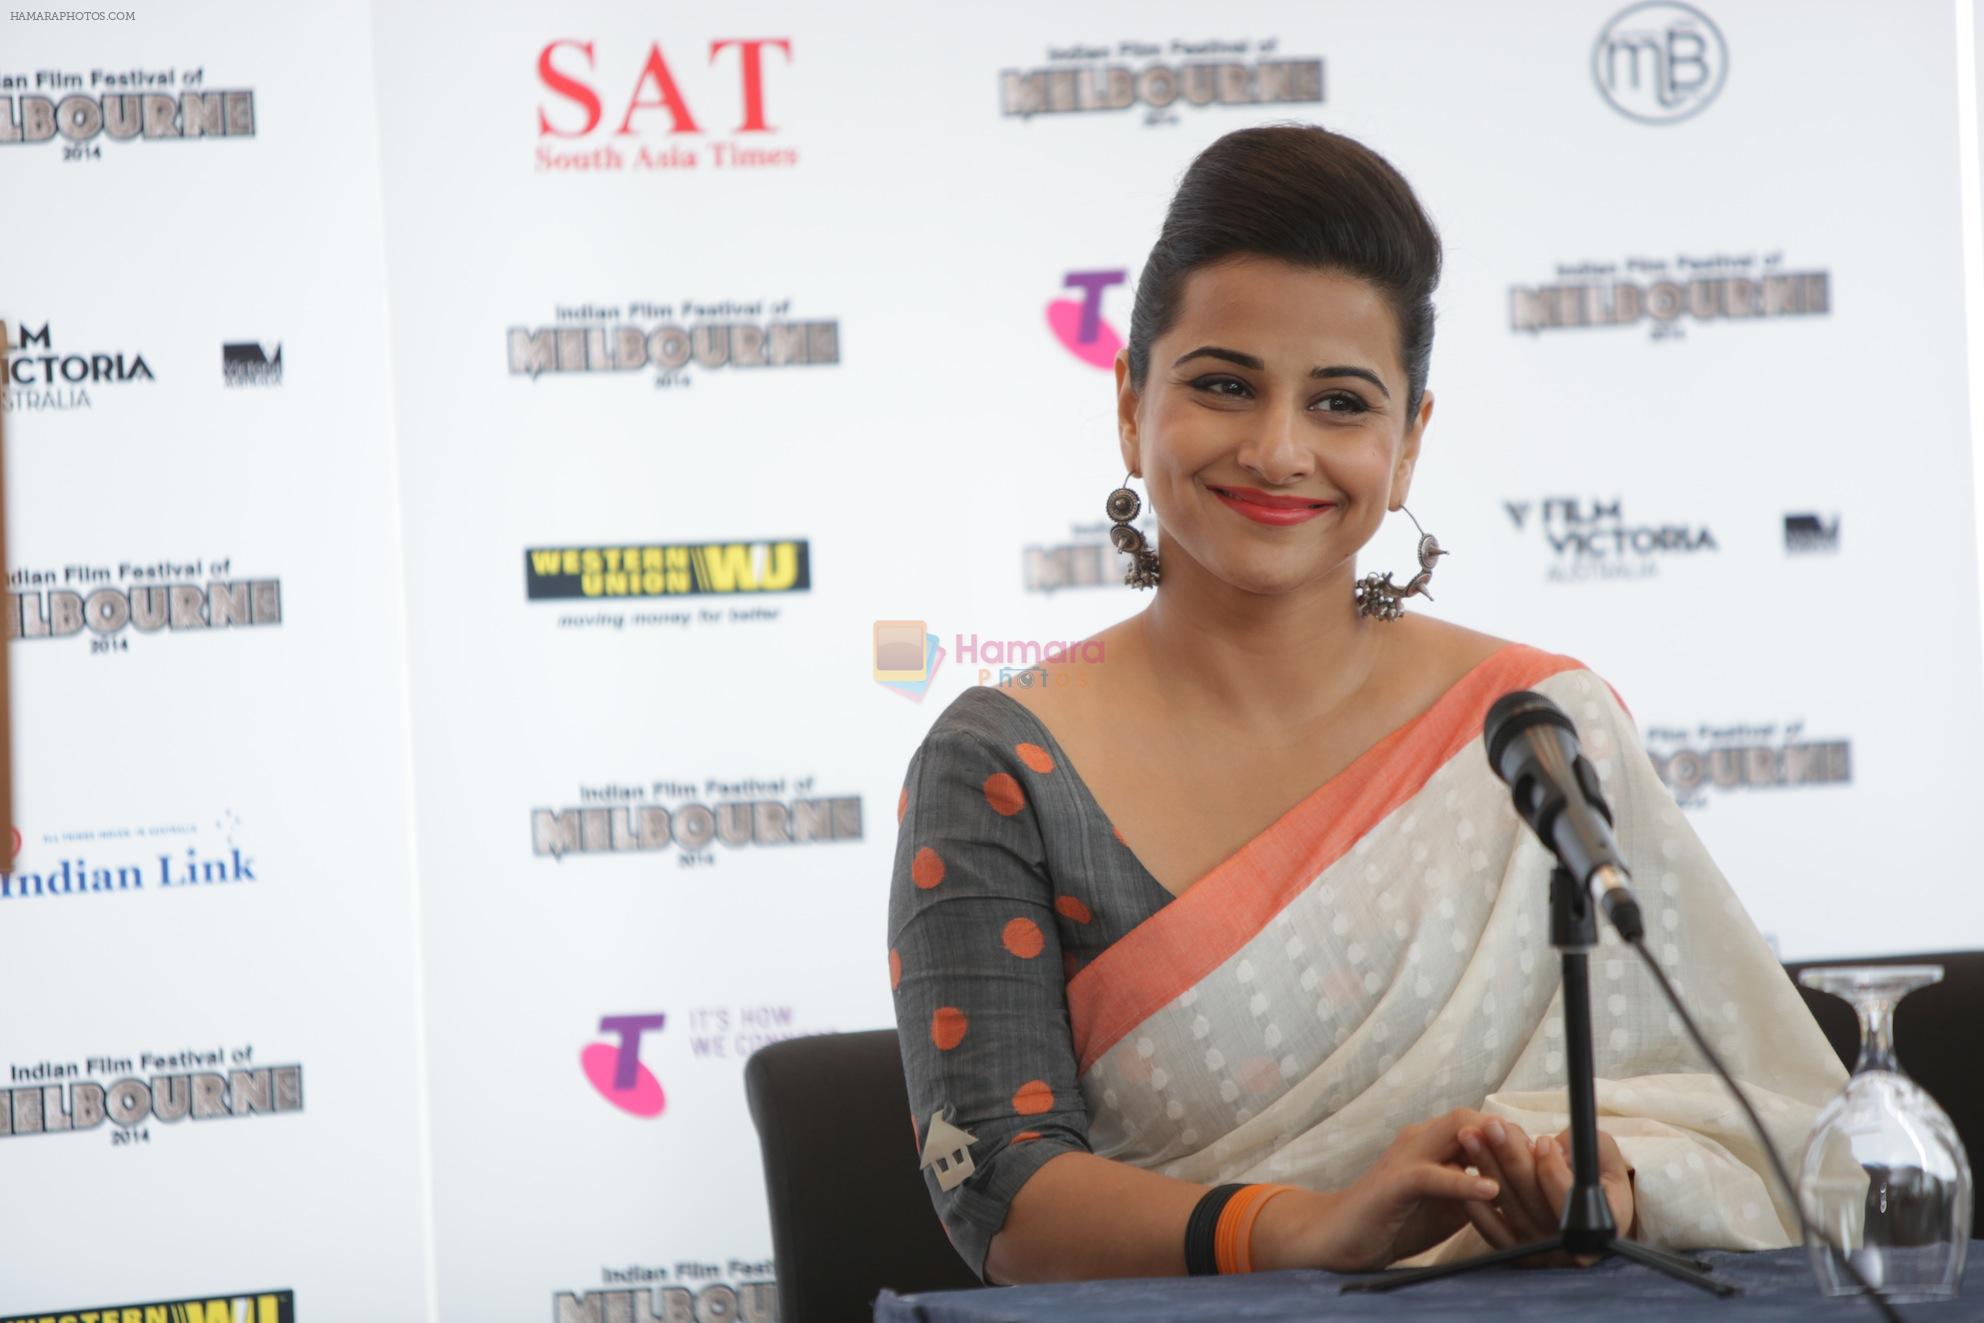 Vidya Balan at The program for the 2014 edition of the Indian Film Festival of Melbourne (IFFM) was launched in Melbourne on 28th March 2014